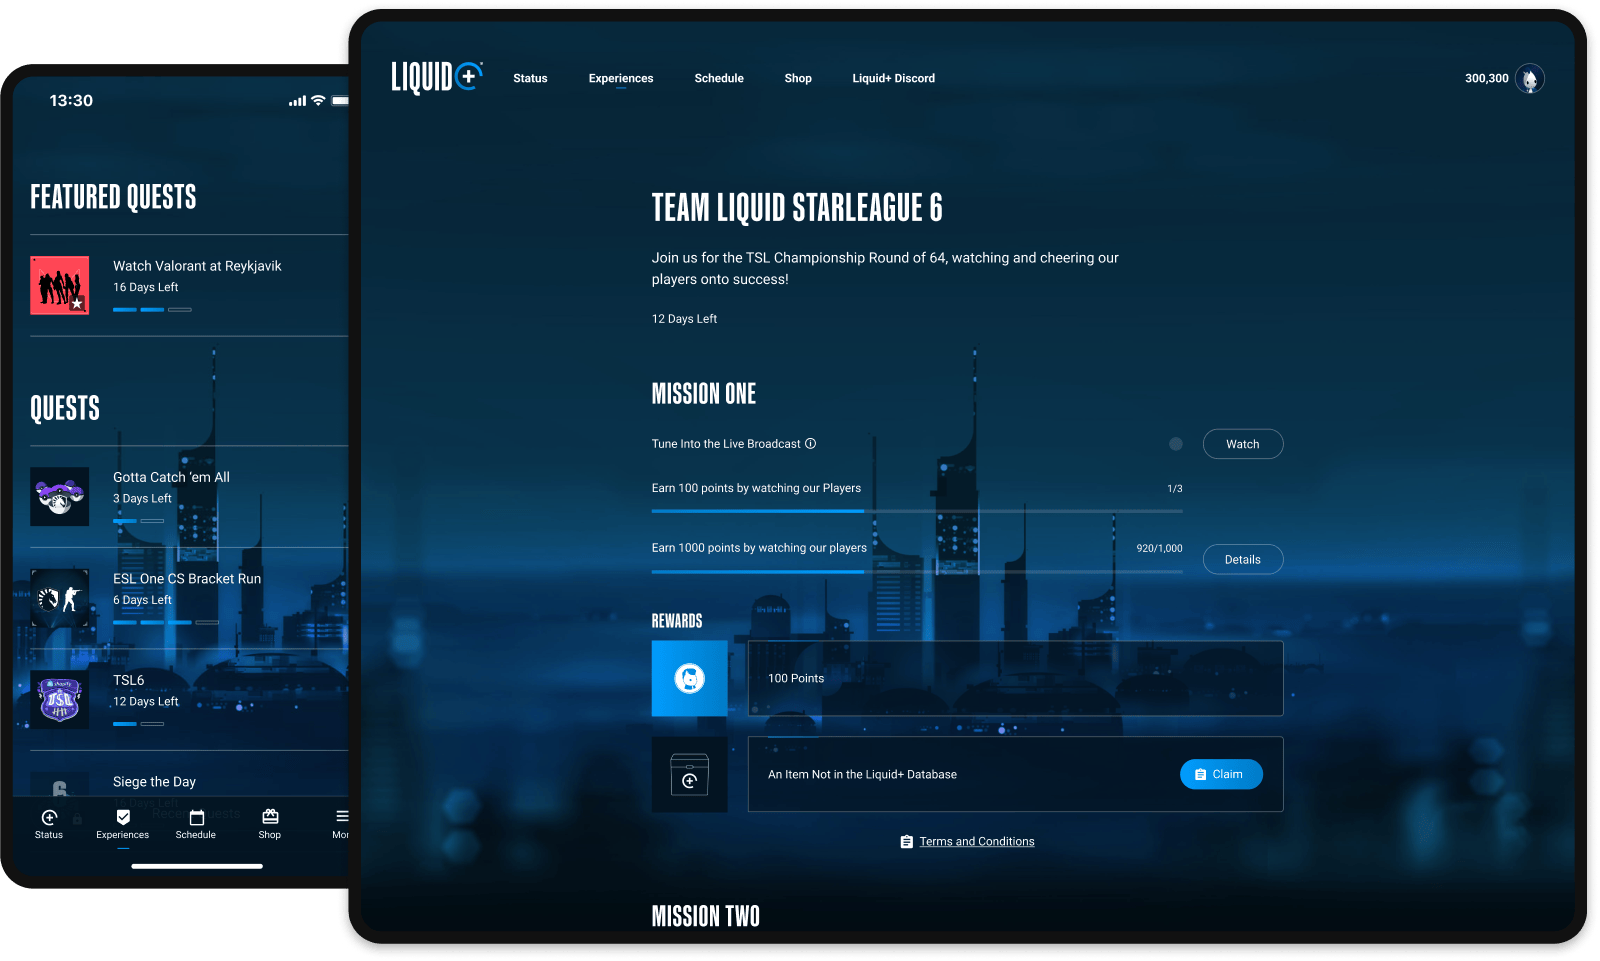 A mobile device showing the Quests available for fans, and a larger device showing a single Quest page (Team Liquid Starleague 6).